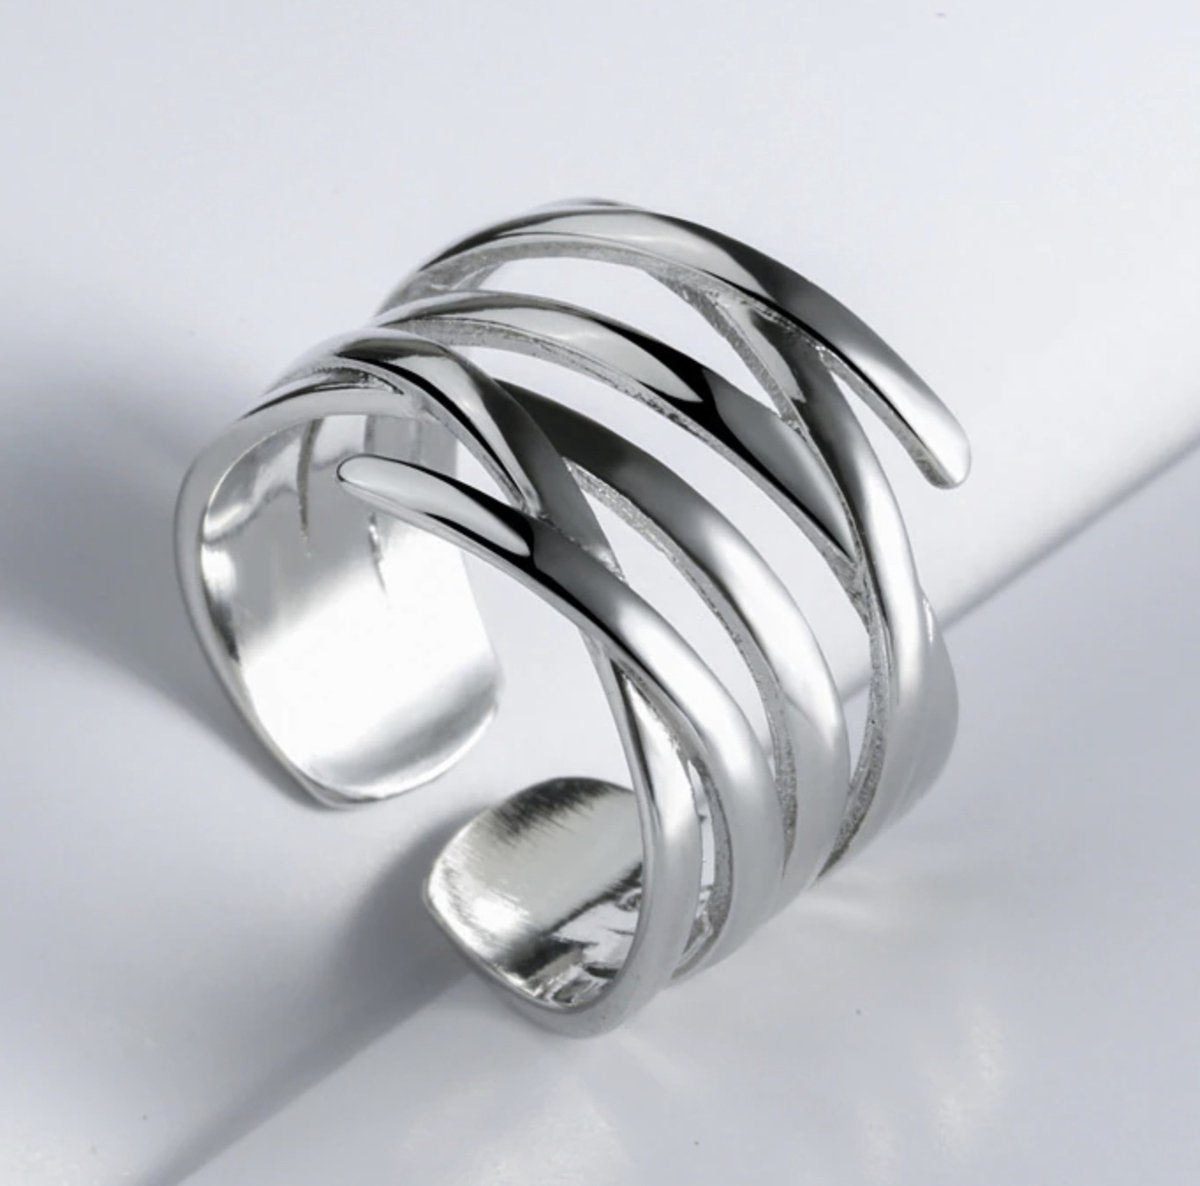 Grote stoere ring, zilver